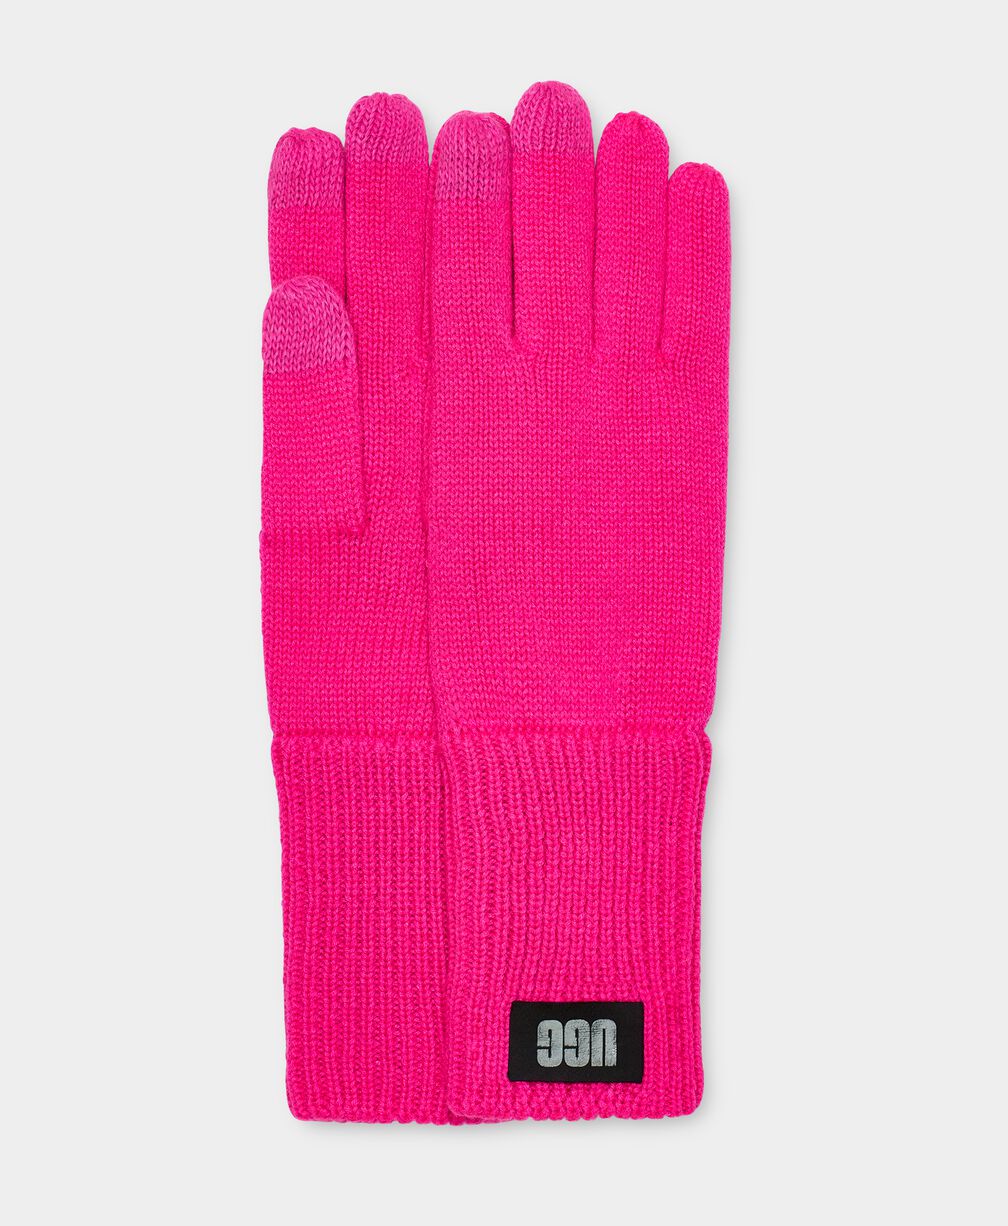 Pop Cuff Knit Glove With Touch Finger